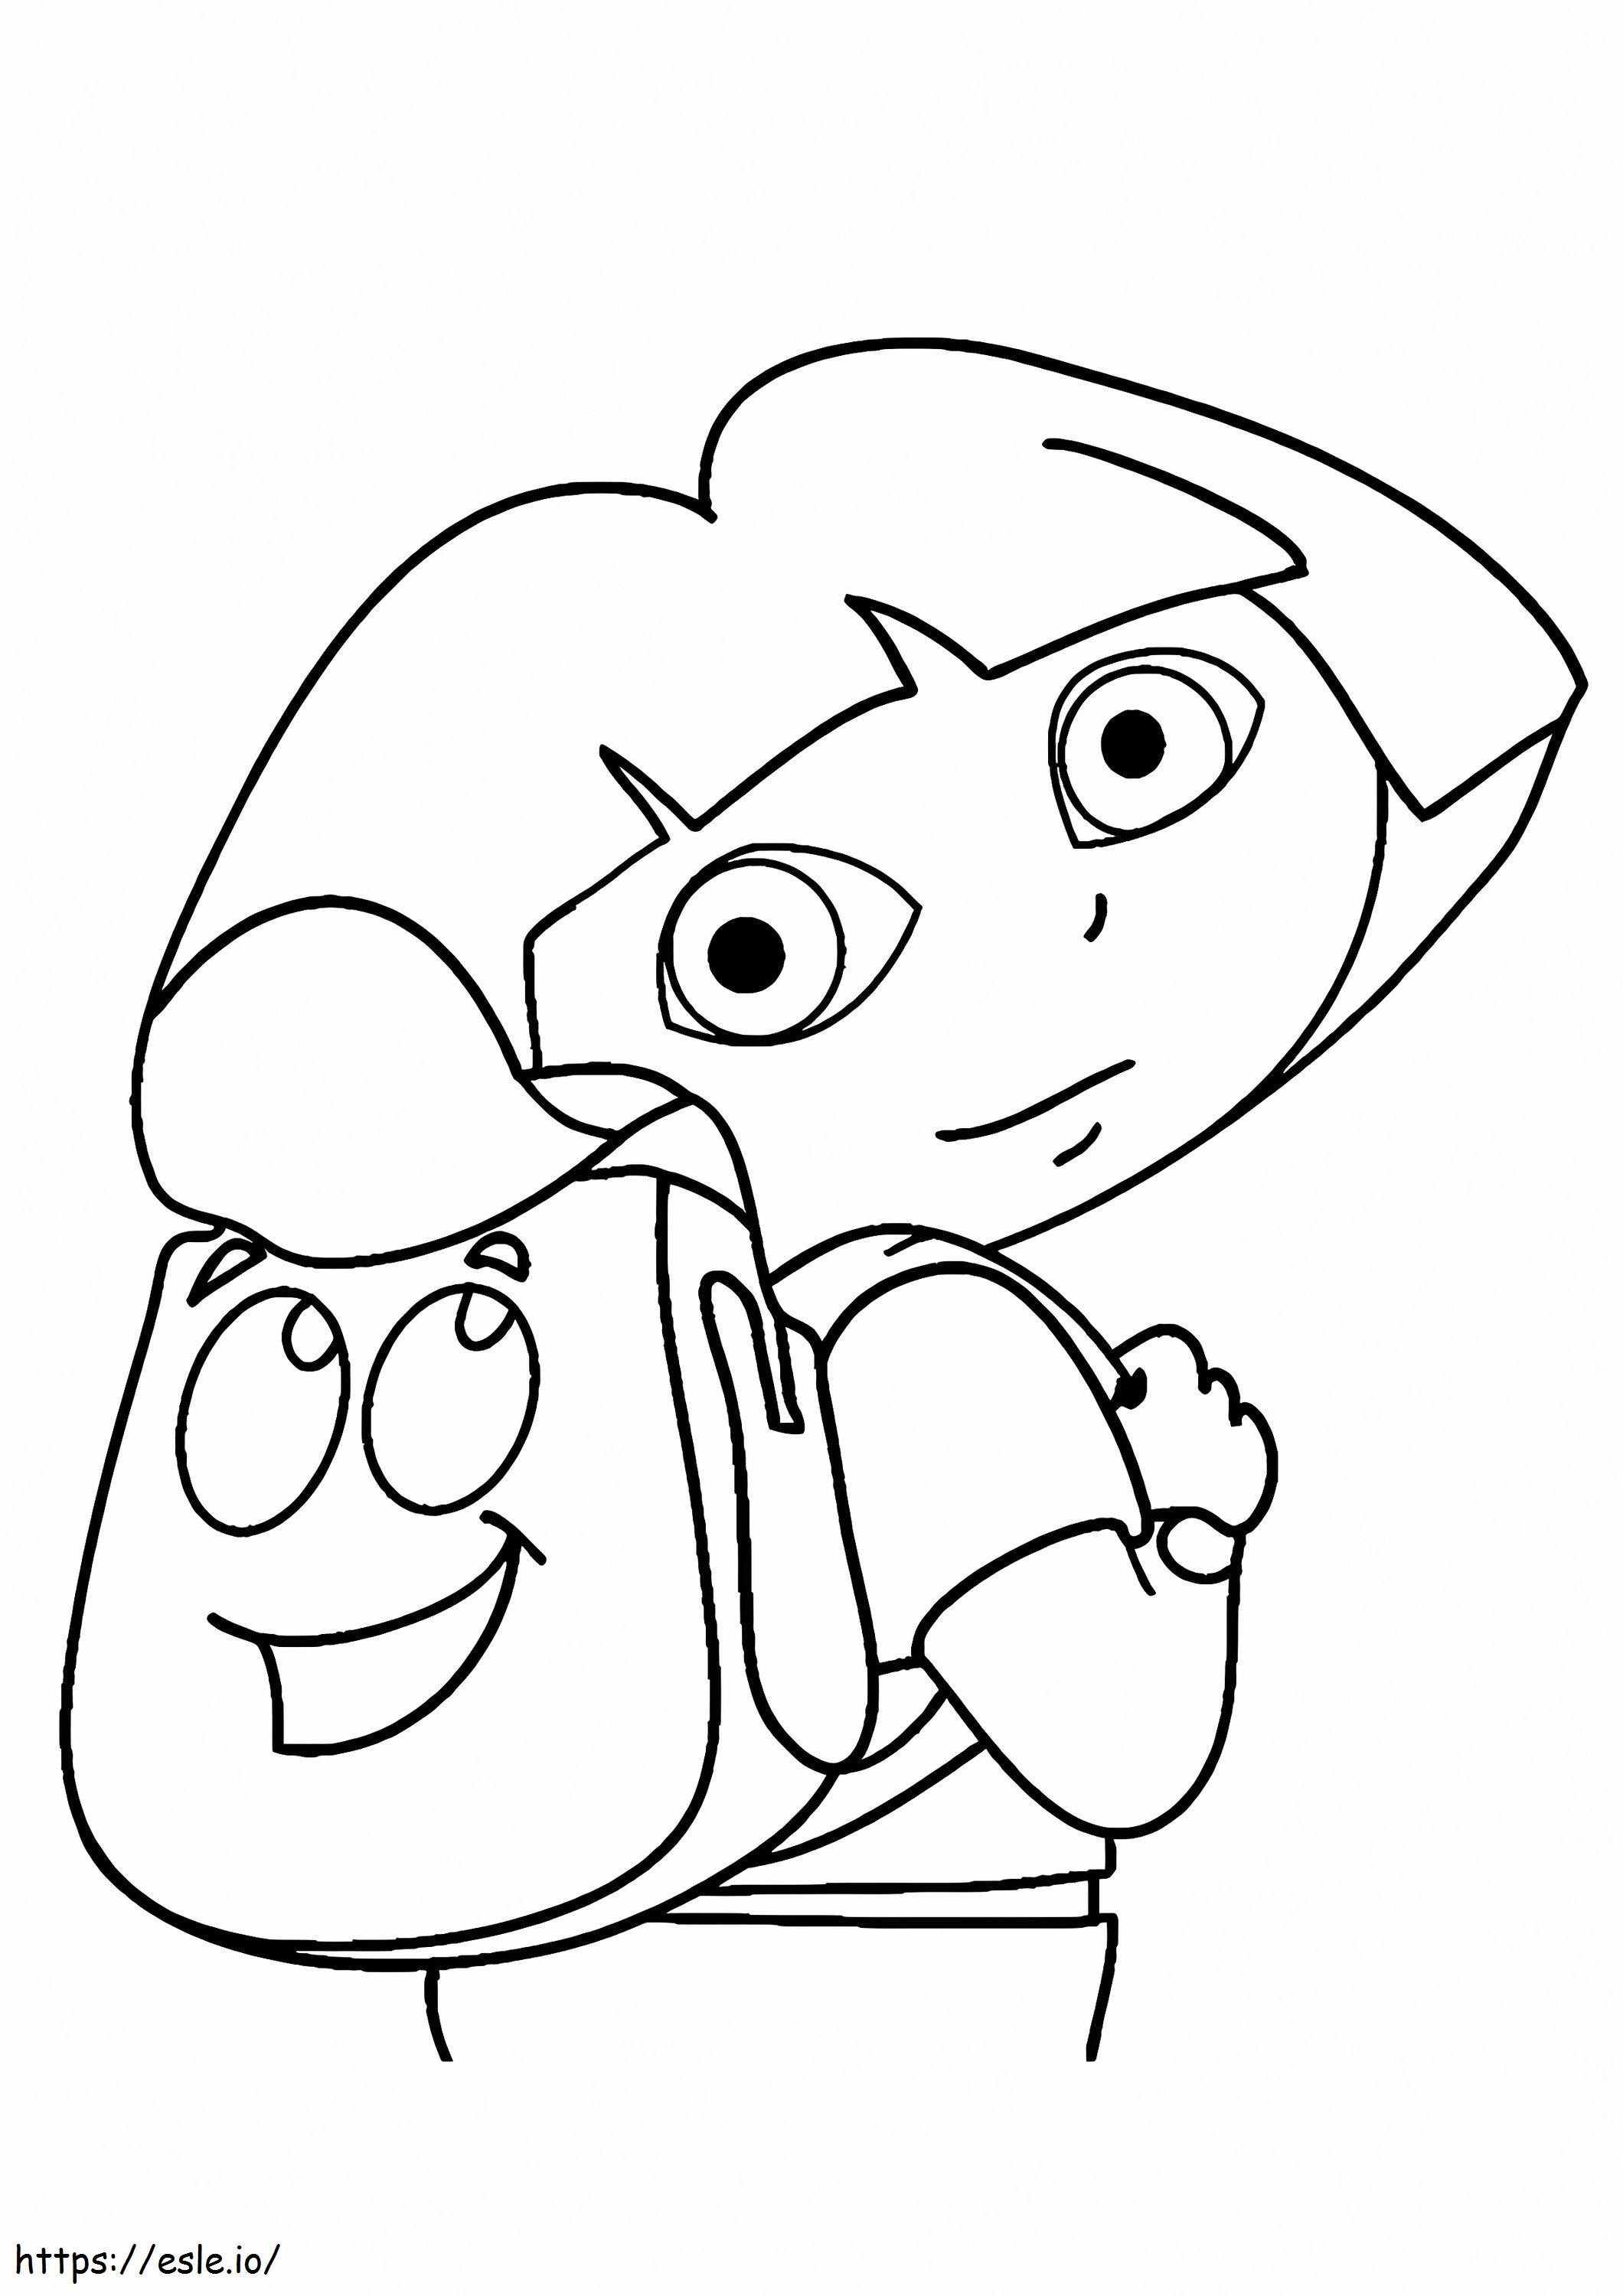 1591869539 Dora With Backpack A4 coloring page